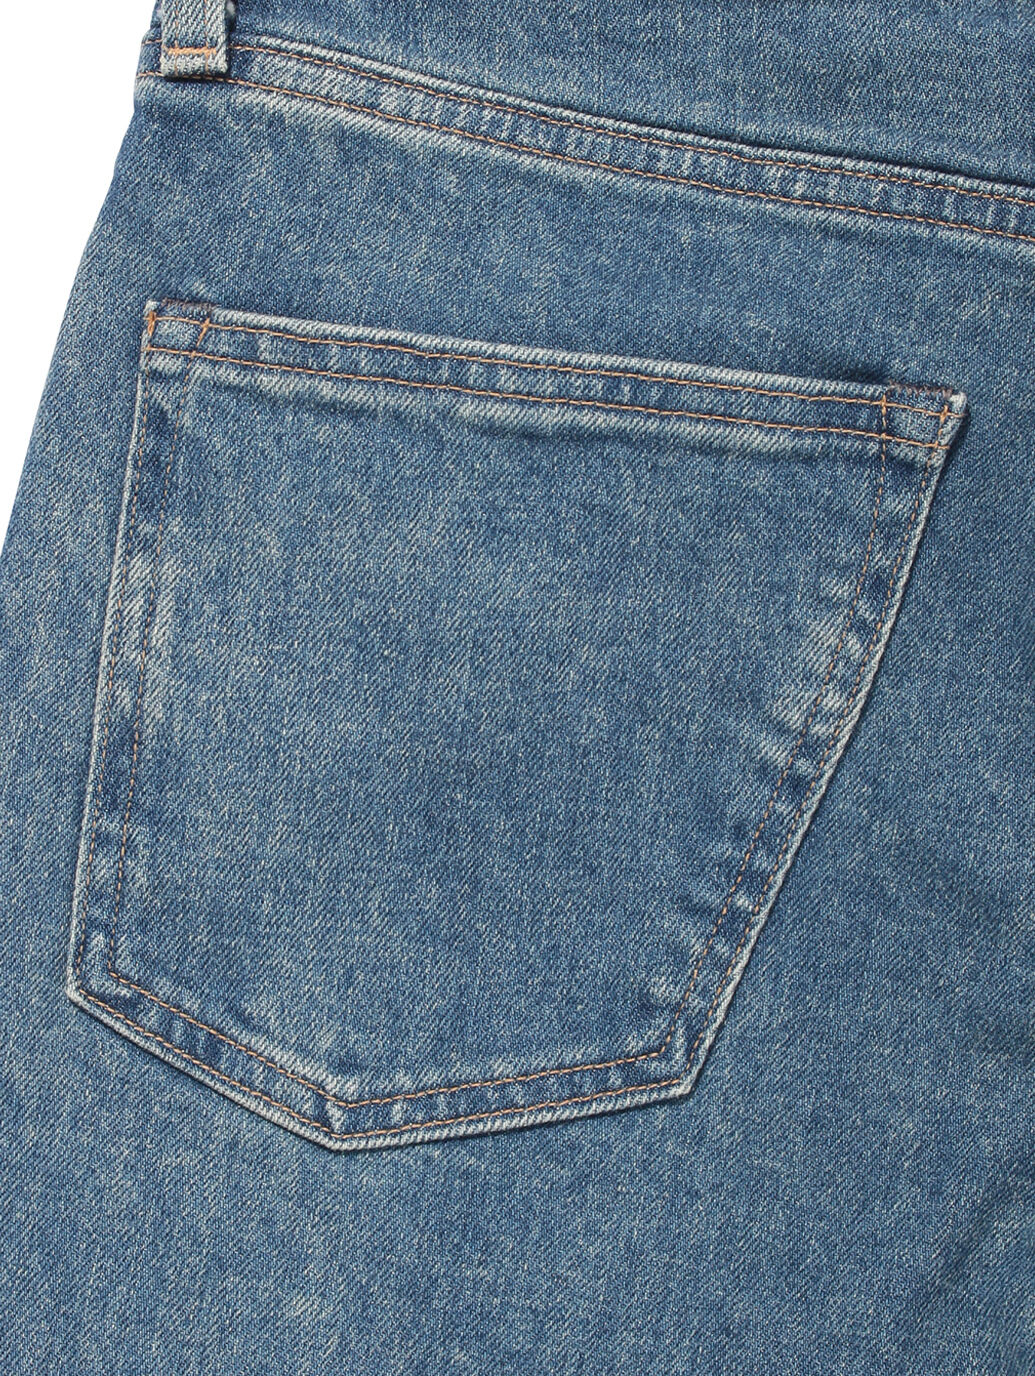 LEVI'S® MADE&CRAFTED®512™ TSUNA MADE IN JAPAN｜リーバイス® 公式通販